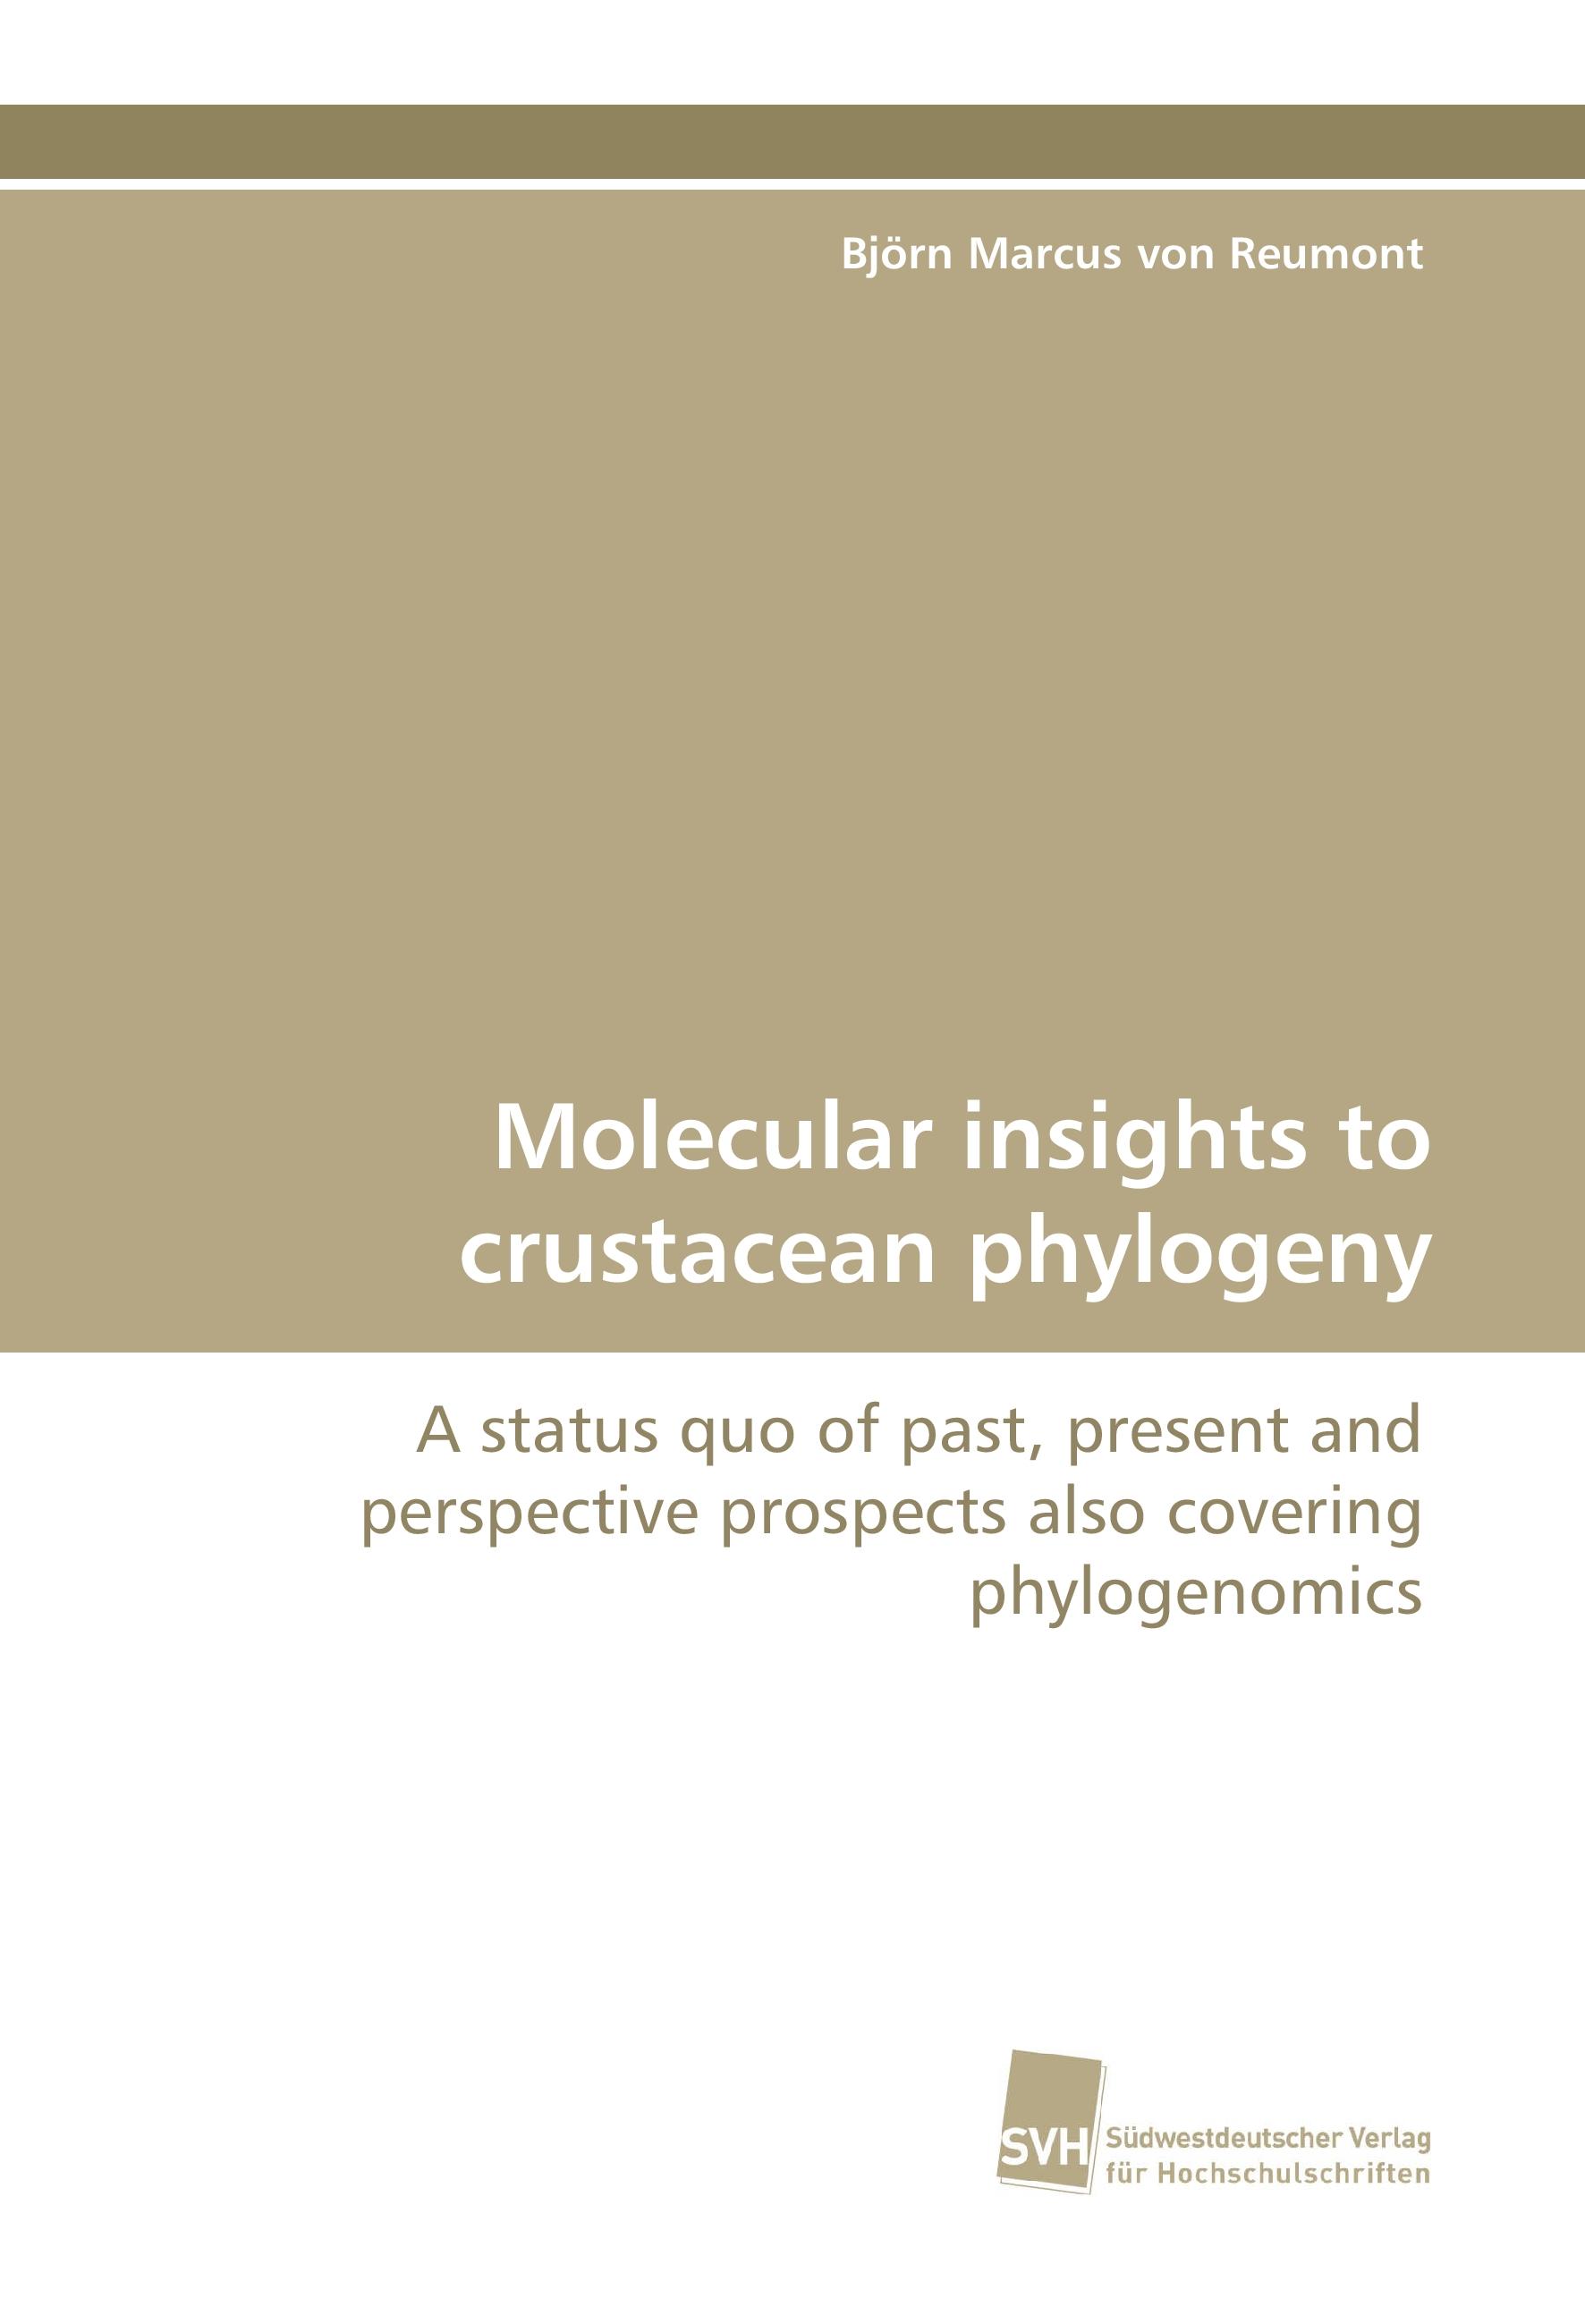 Molecular insights to crustacean phylogeny / A status quo of past, present and perspective prospects also covering phylogenomics / Björn Marcus von Reumont / Taschenbuch / Paperback / 320 S. / 2015 - Reumont, Björn Marcus von